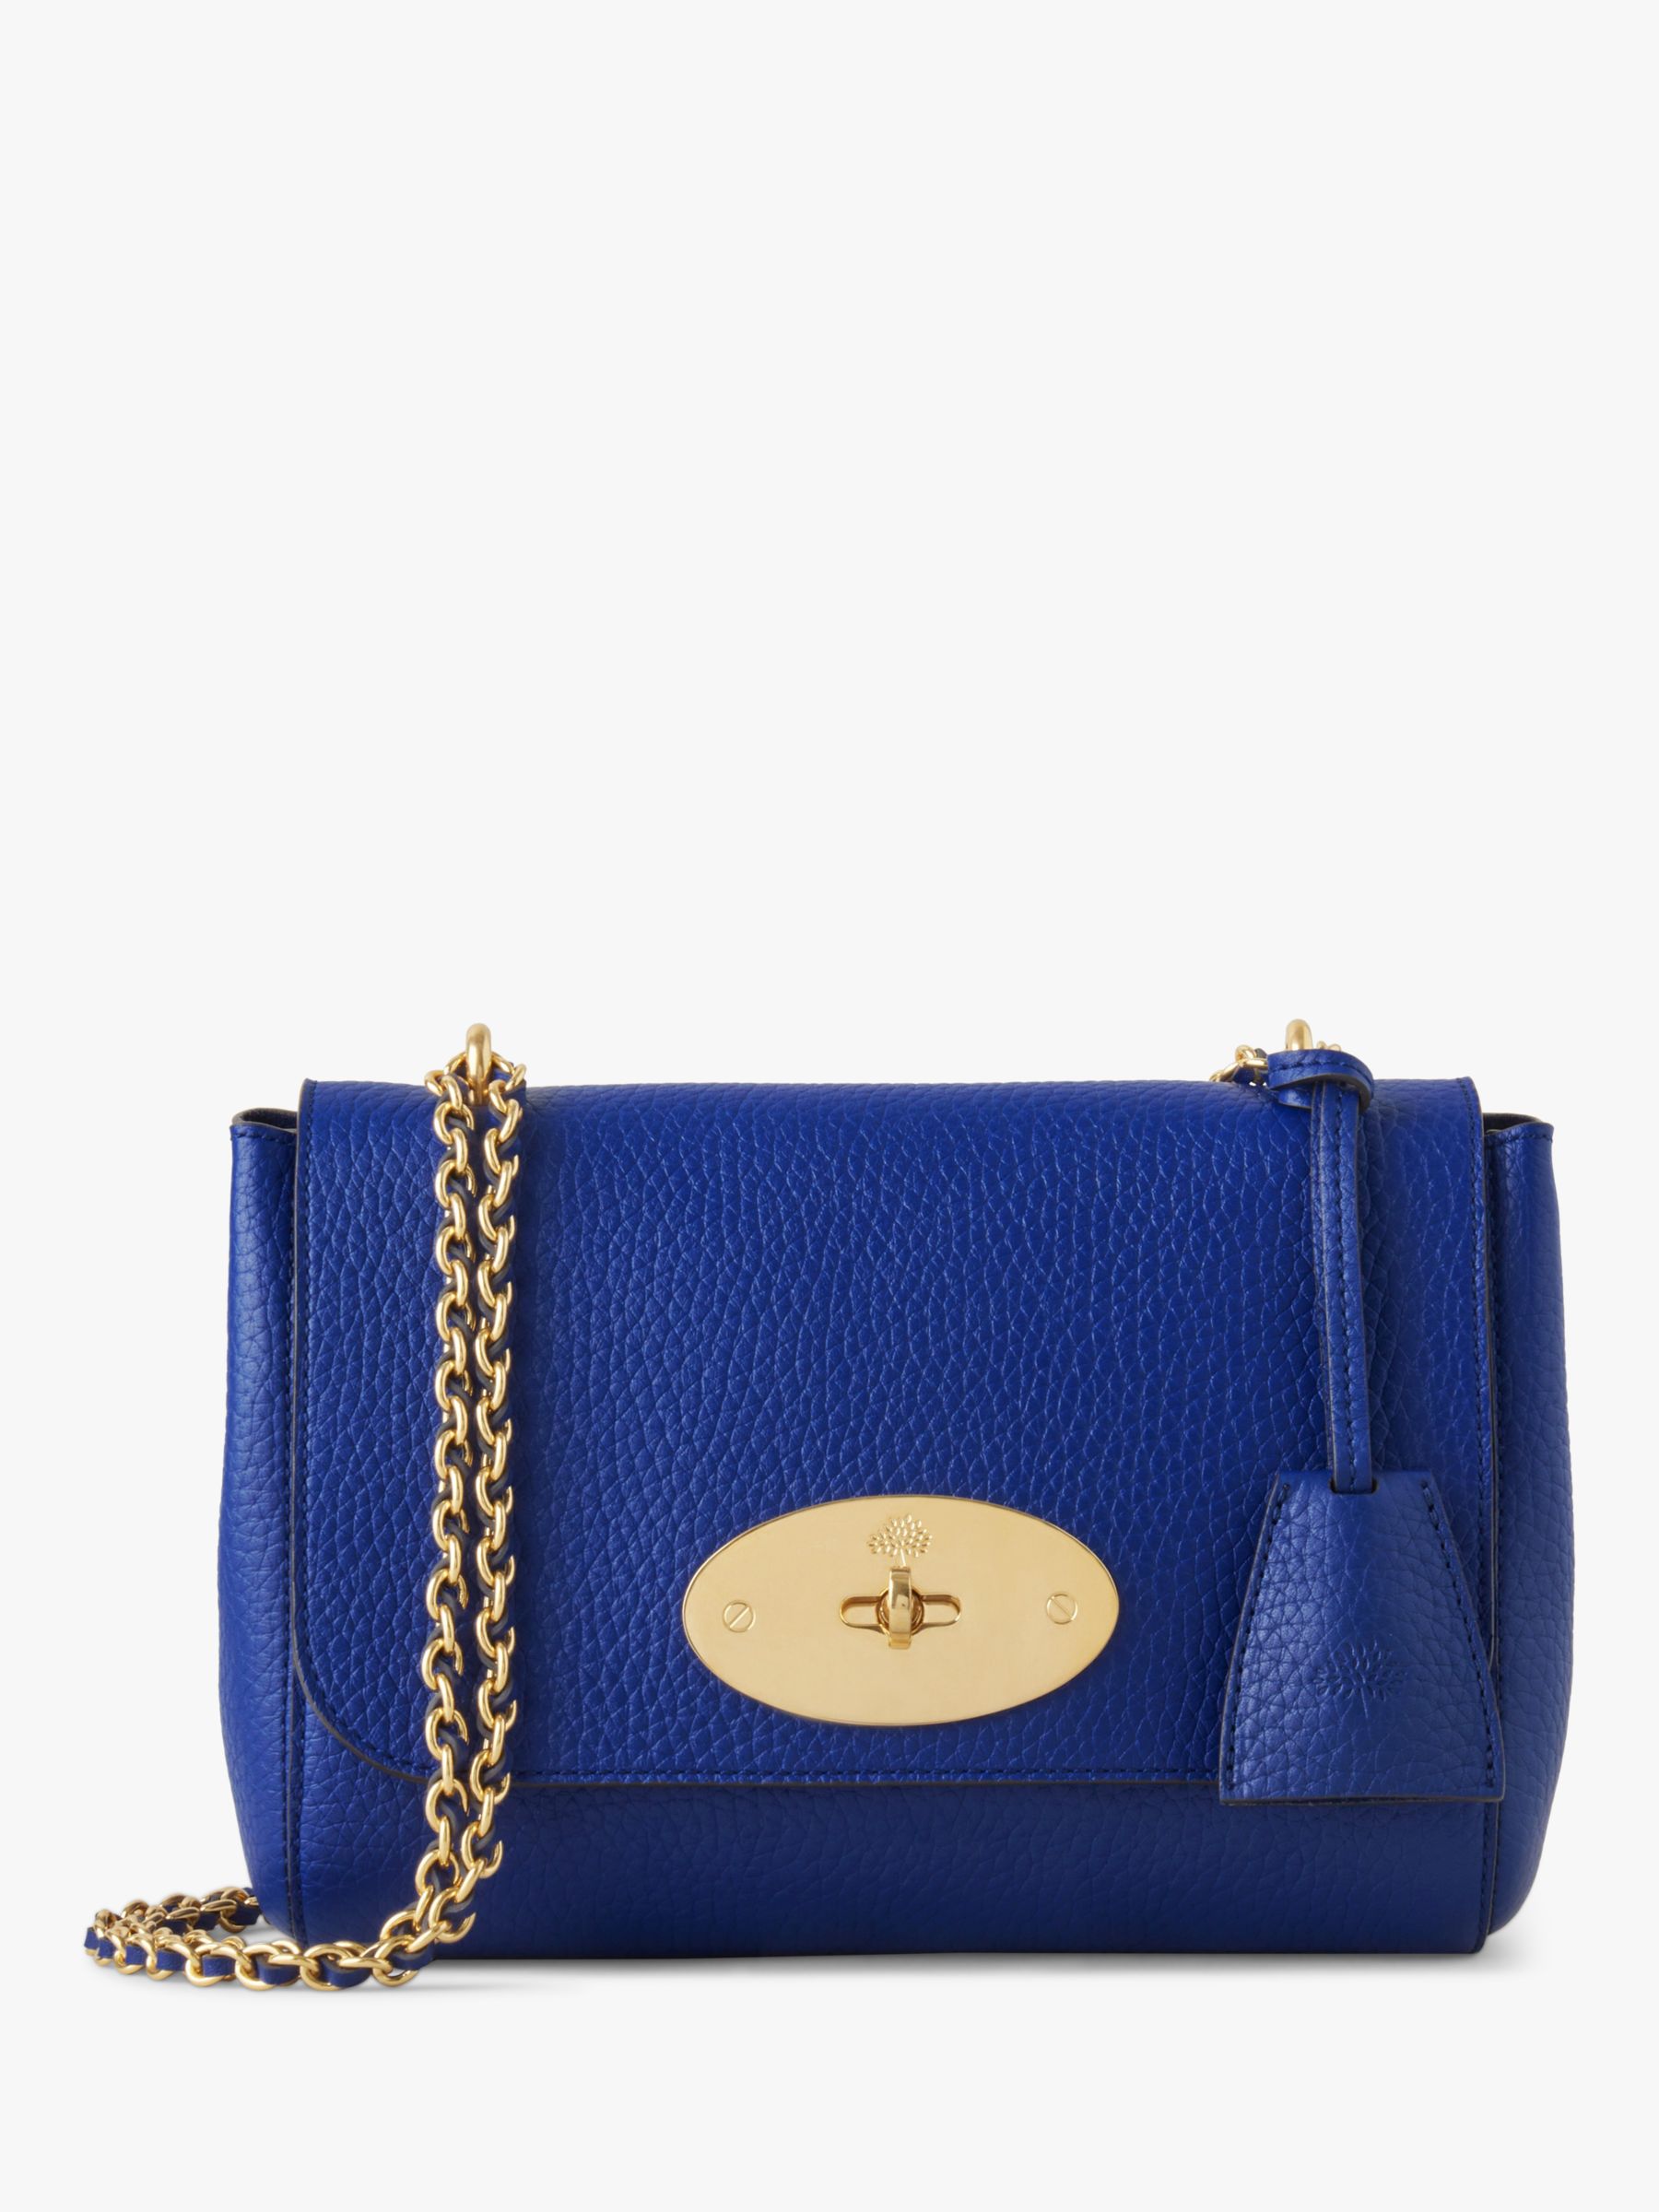 Mulberry Lily Heavy Grain Leather Shoulder Bag, Pigment Blue at John ...